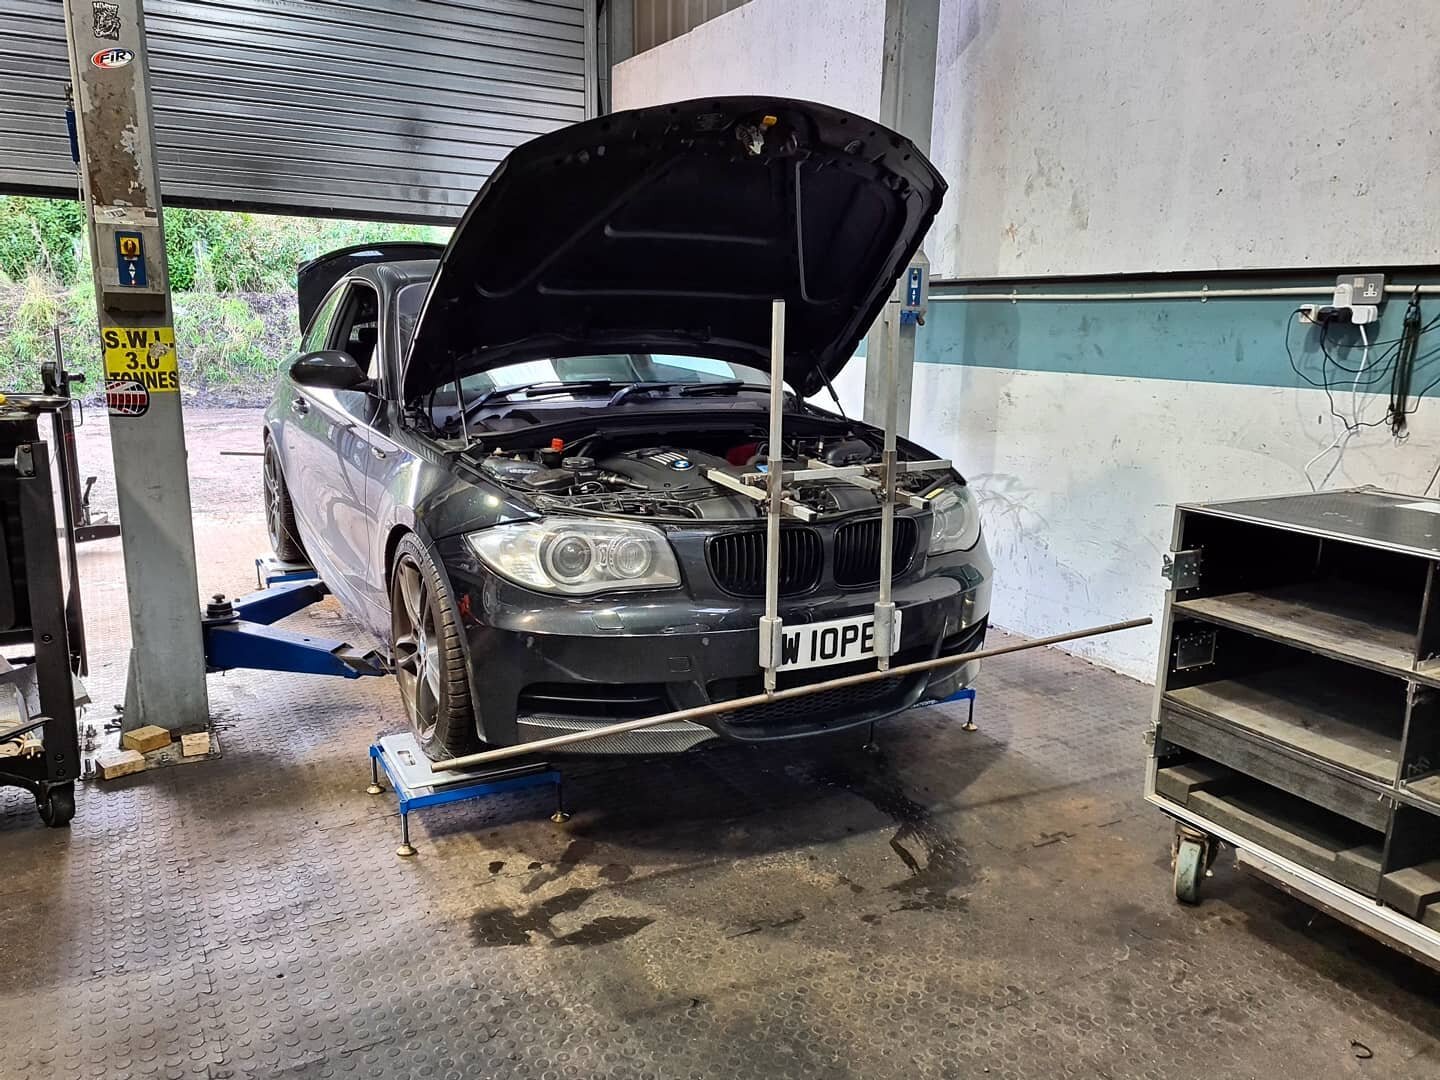 135i day, 

Aaron's 135i in for a bilstein b12 fitting and set up 

The other 135i in for the very common wastegate rattle

#135i #bmw #bmw135i #mperformance #mpower #performancecars #performancebmw  #babybmw #suspensionsetup #motorsport #engineering